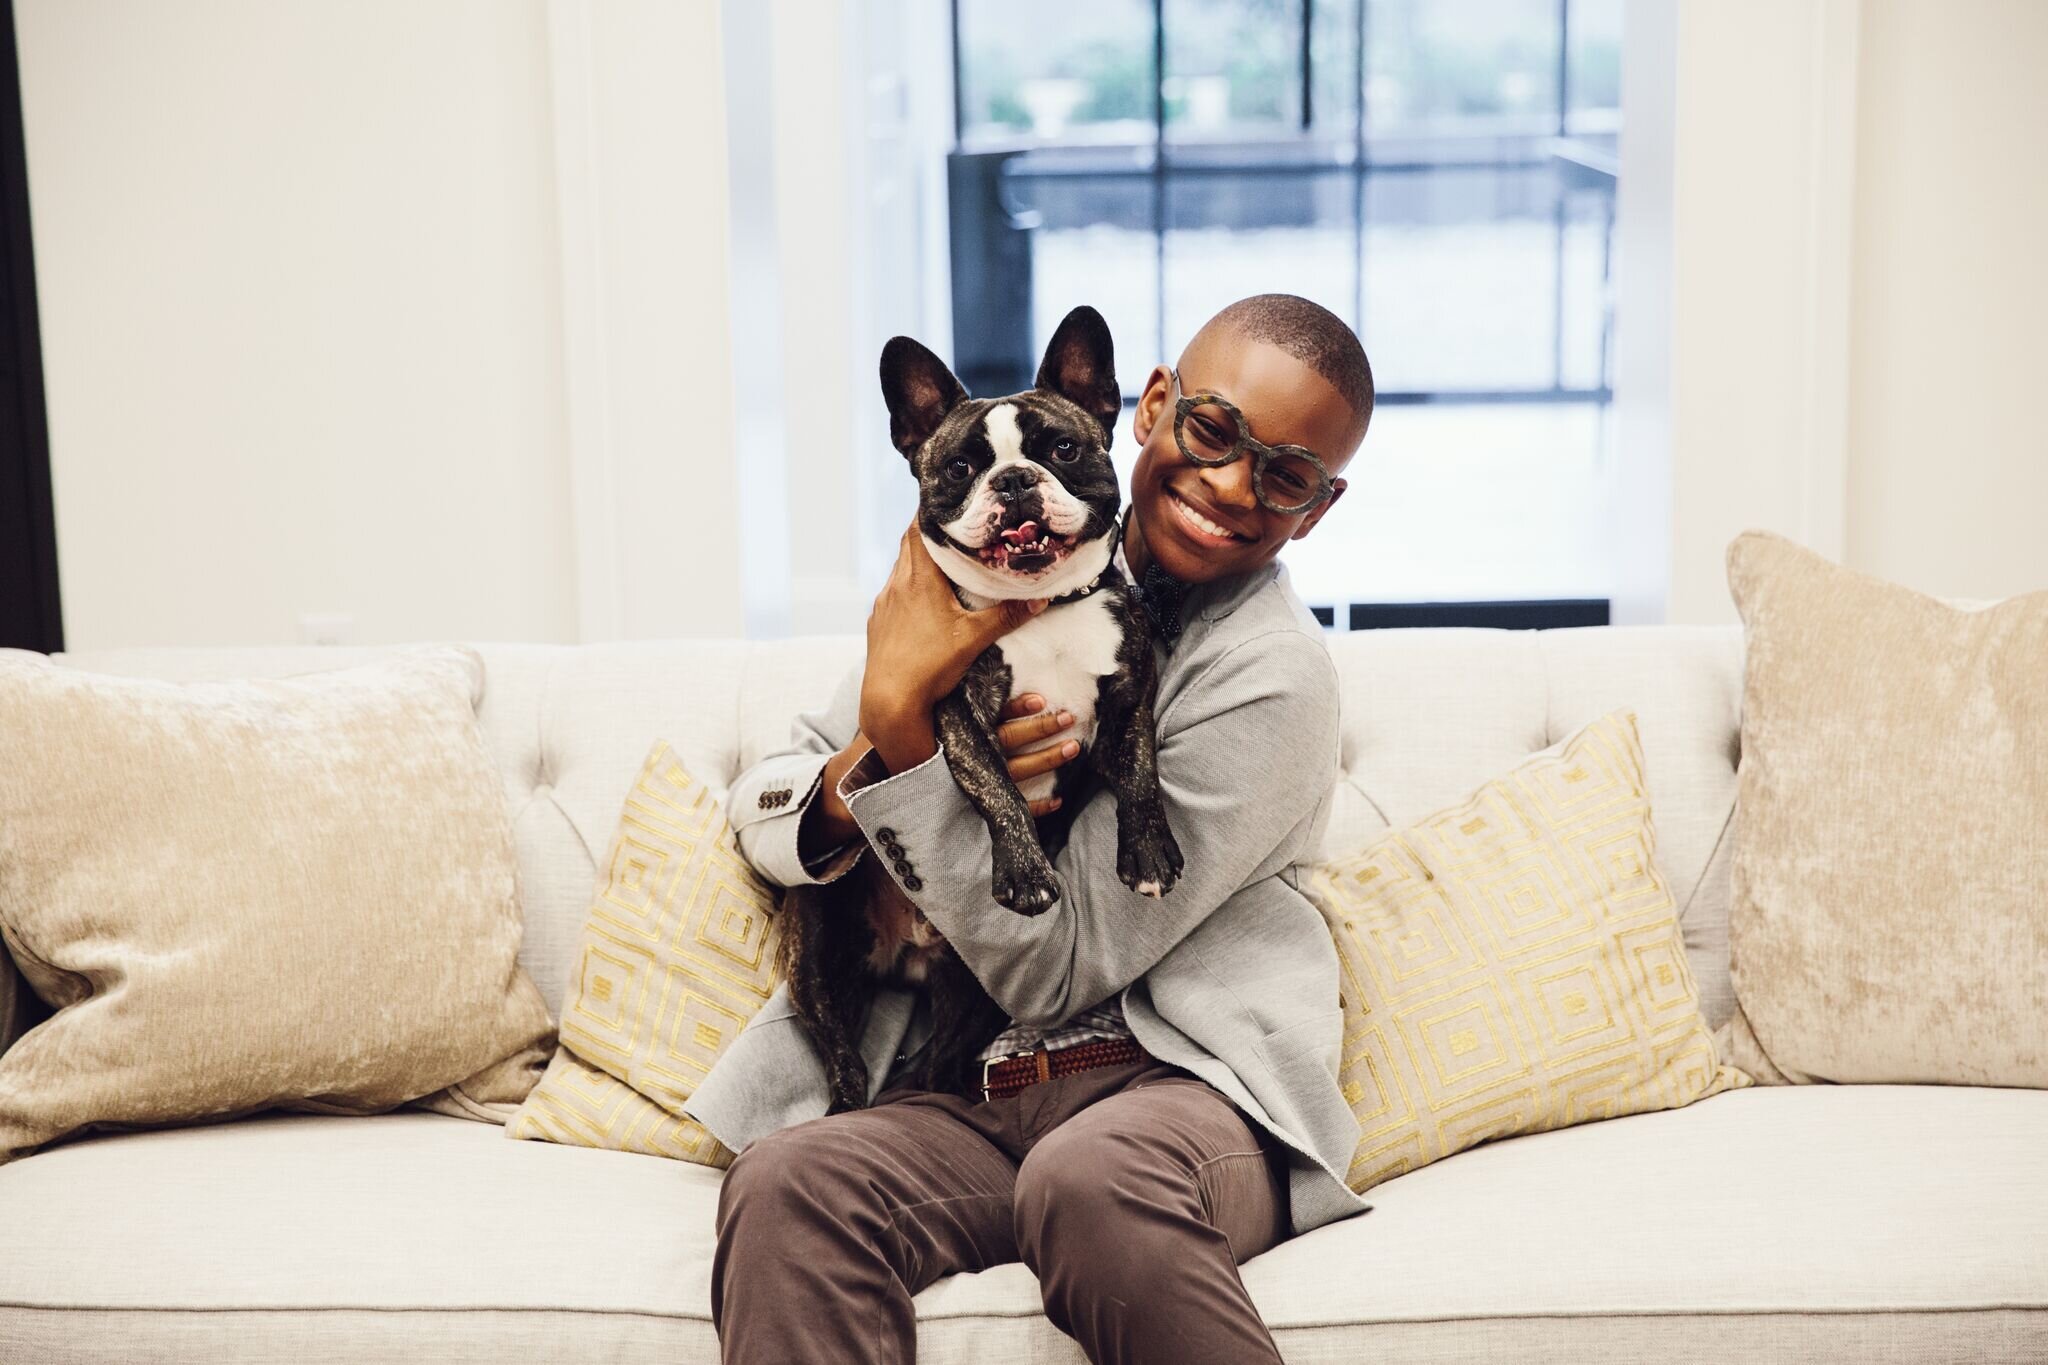 Moziah Bridges launched his business, Mo's Bows, at the age of nine. He's now 17 with a booming business, international attention and a first book. His next step? High school graduation in 2020. (Mo's Bows)